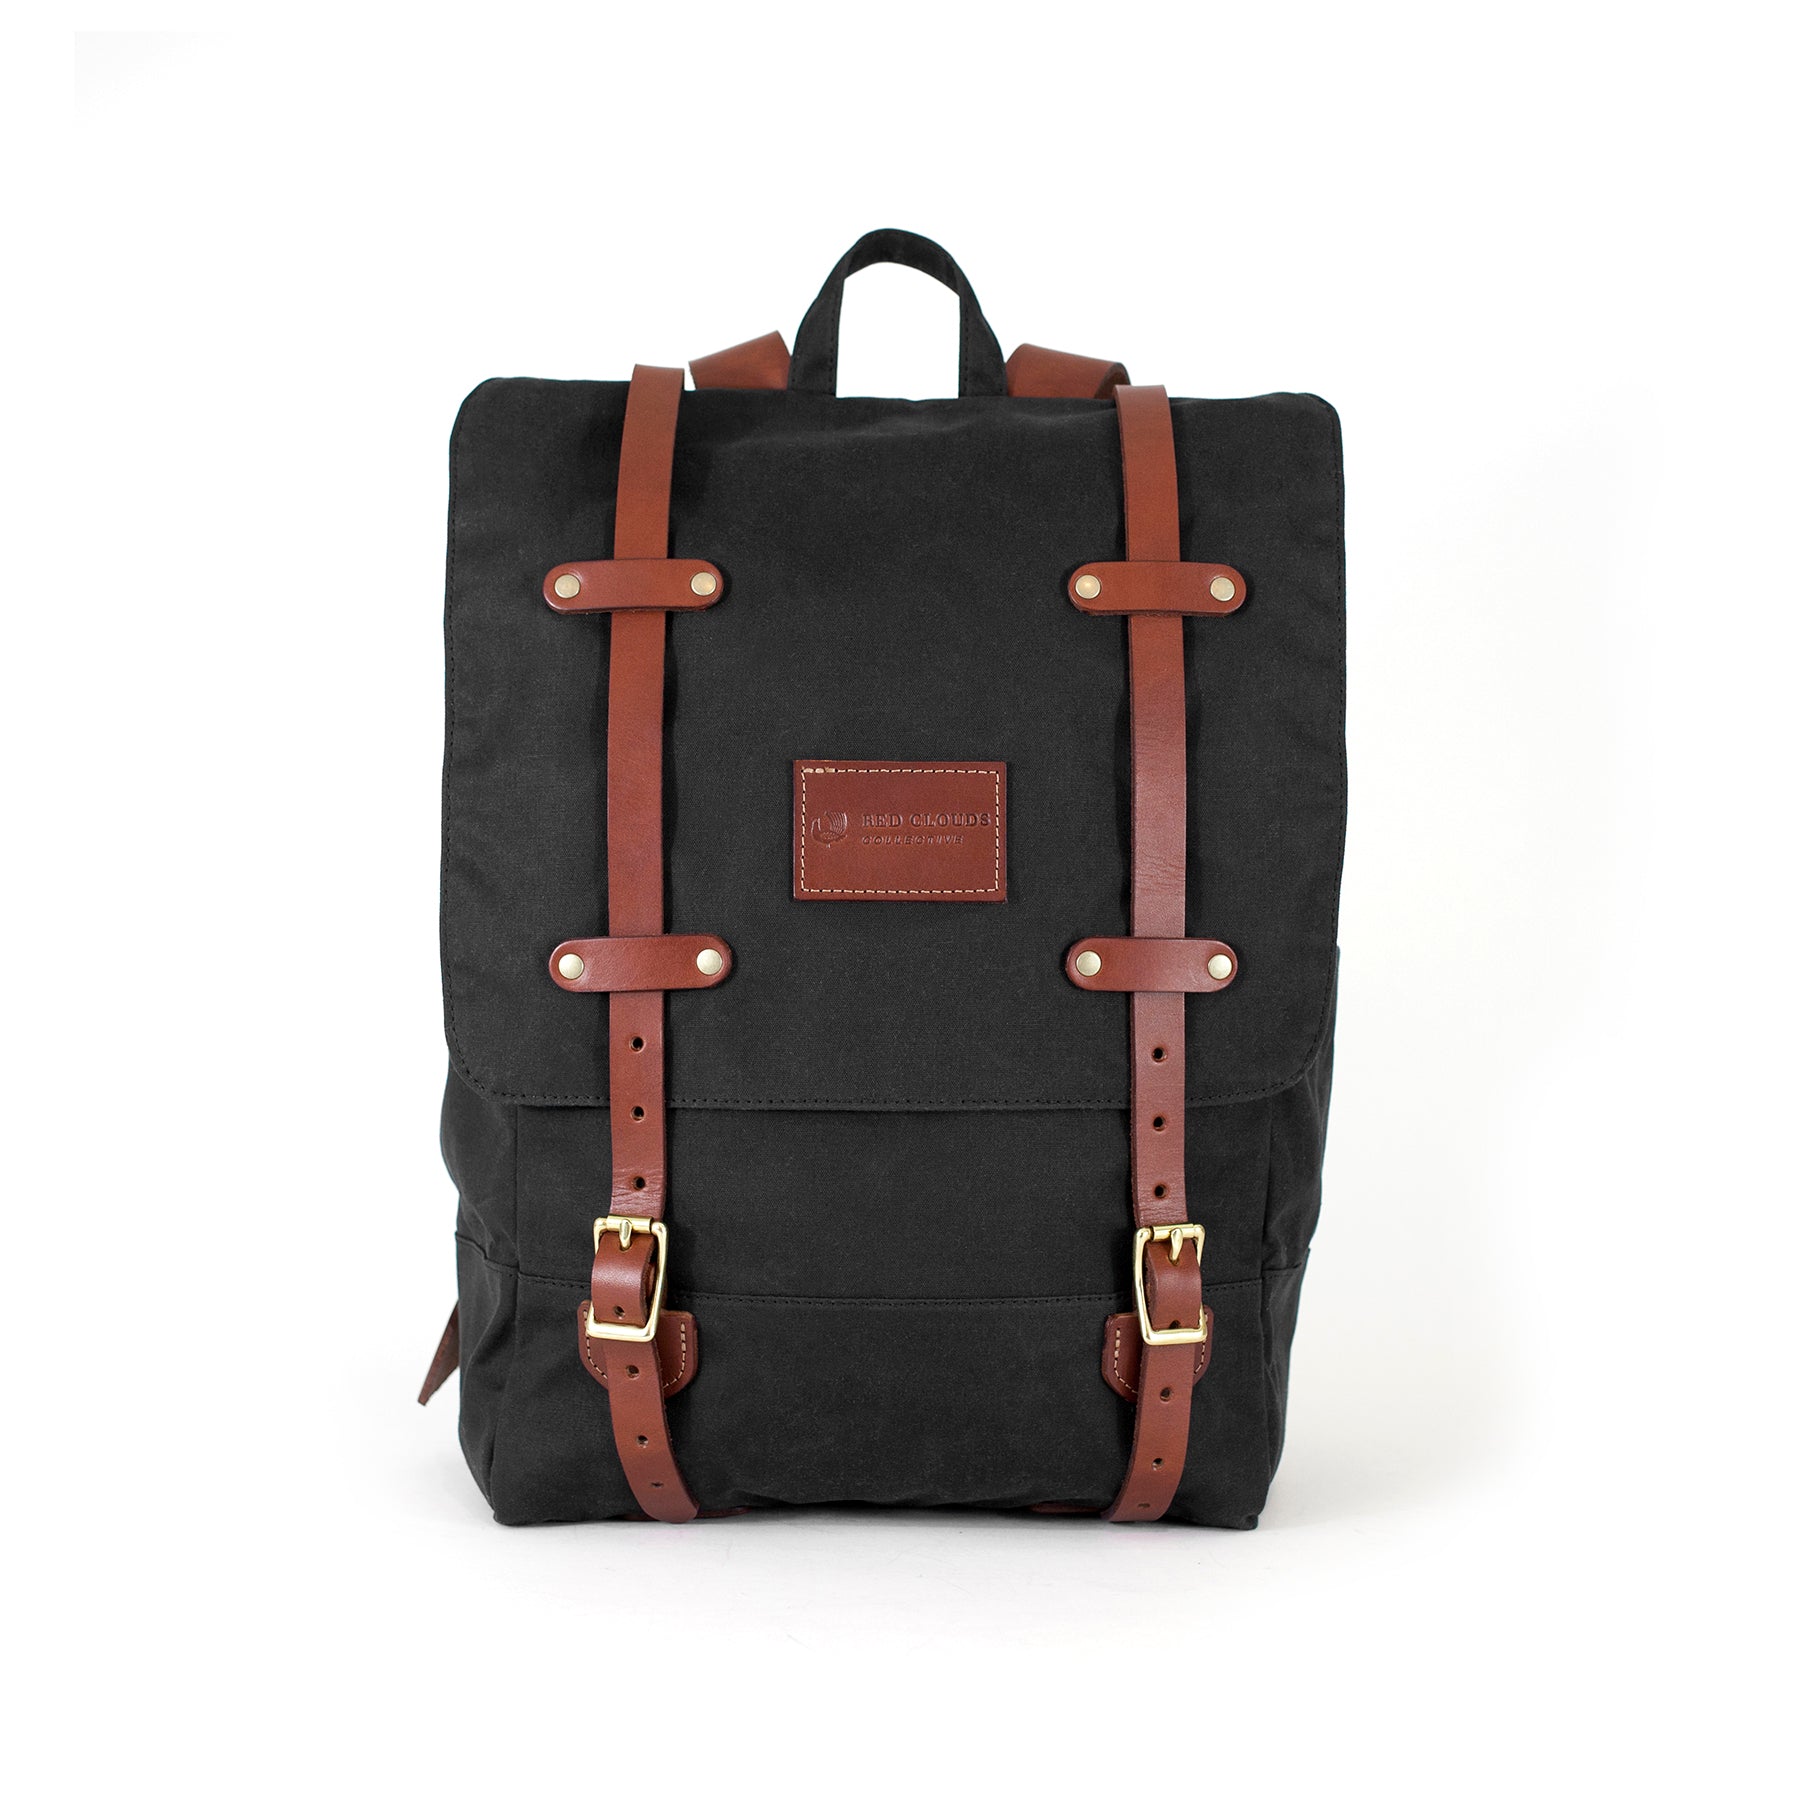 The Catamount Backpack - Black / Brown - Red Clouds Collective